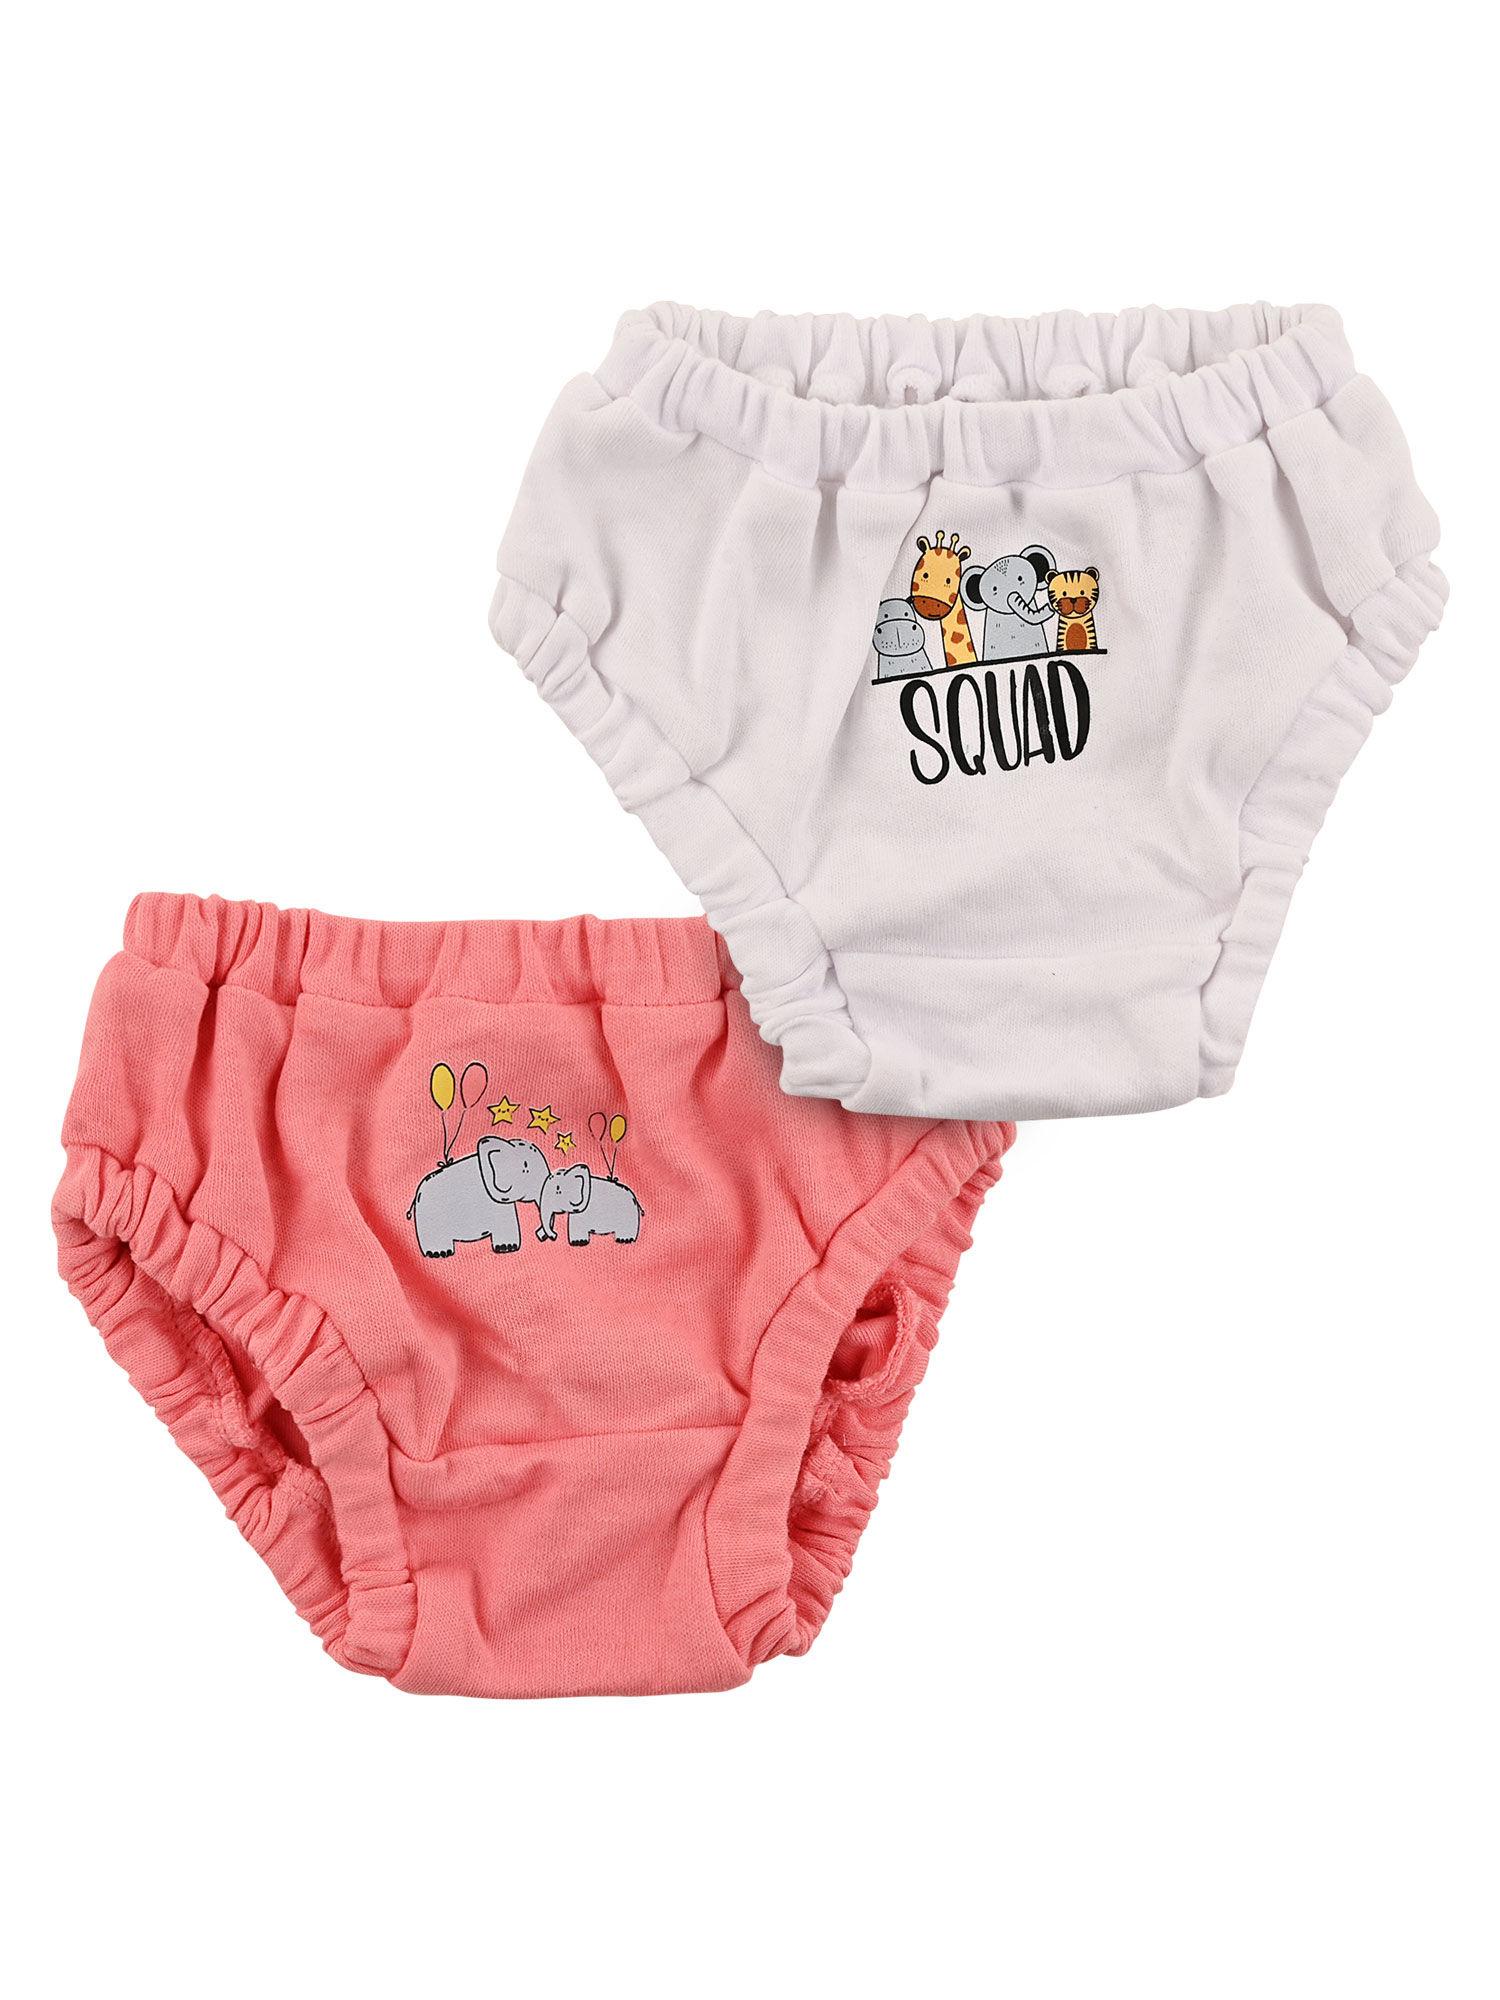 baby-girls-printed-bloomer-brief-underwear-pink-and-white-(pack-of-2)